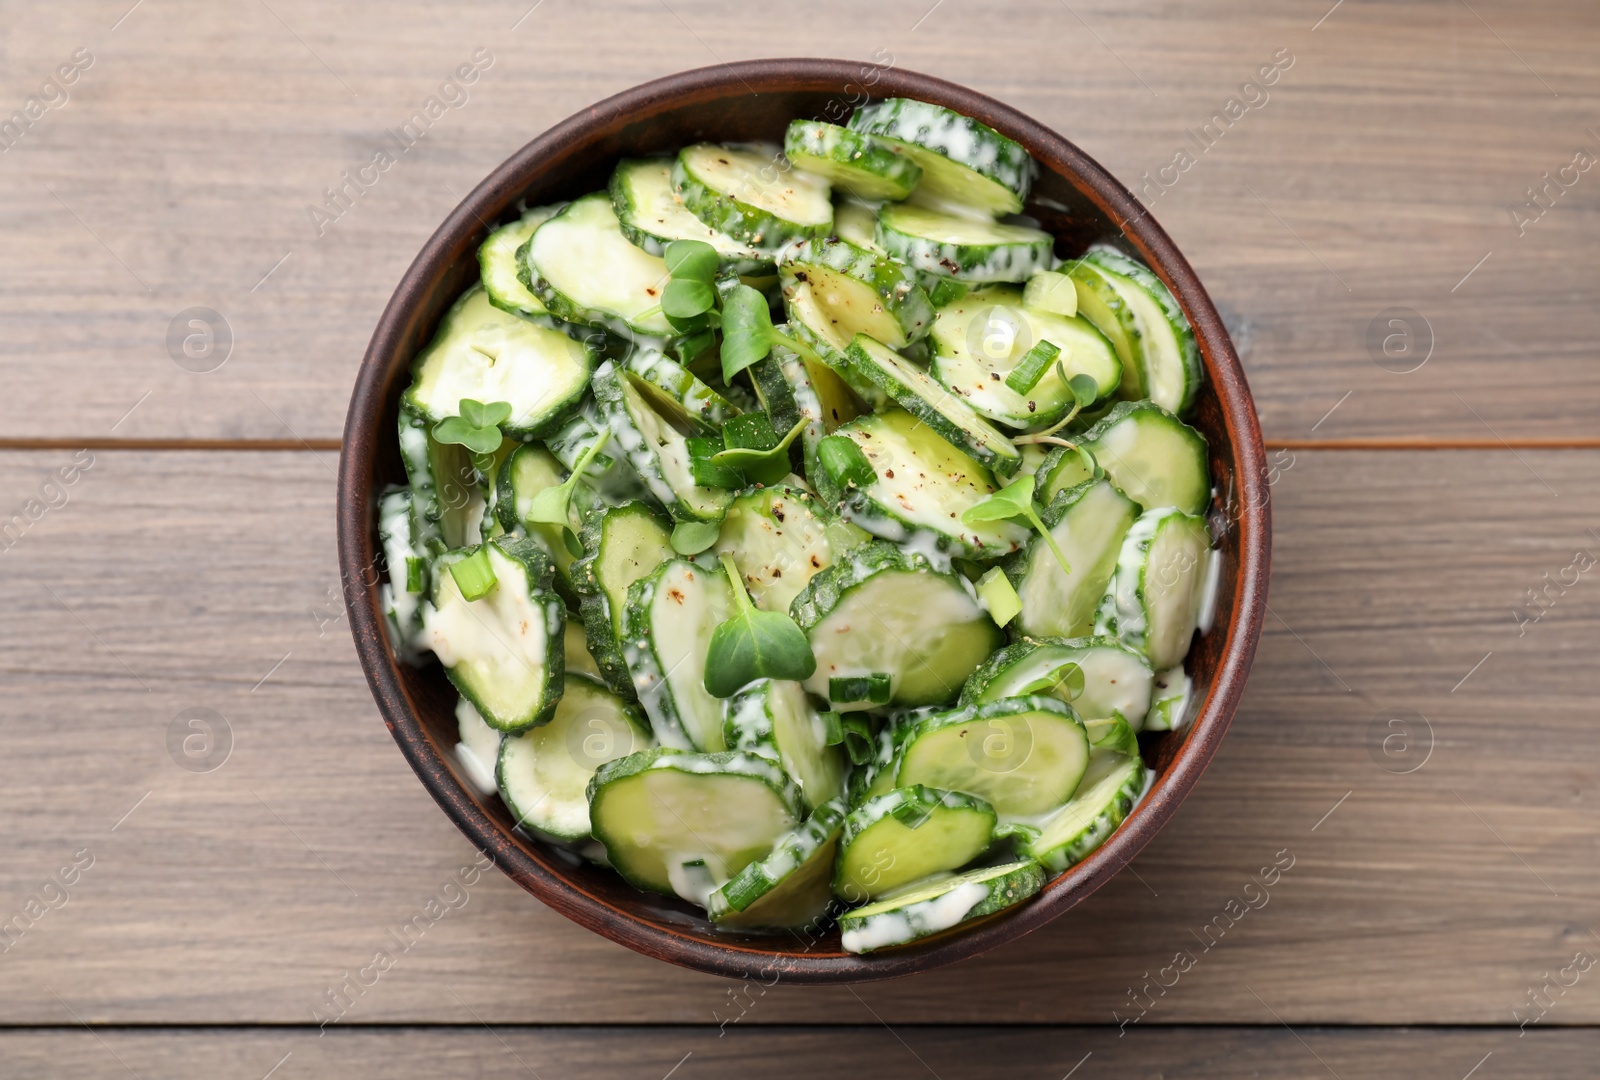 Photo of Bowl of delicious cucumber salad on wooden table, top view